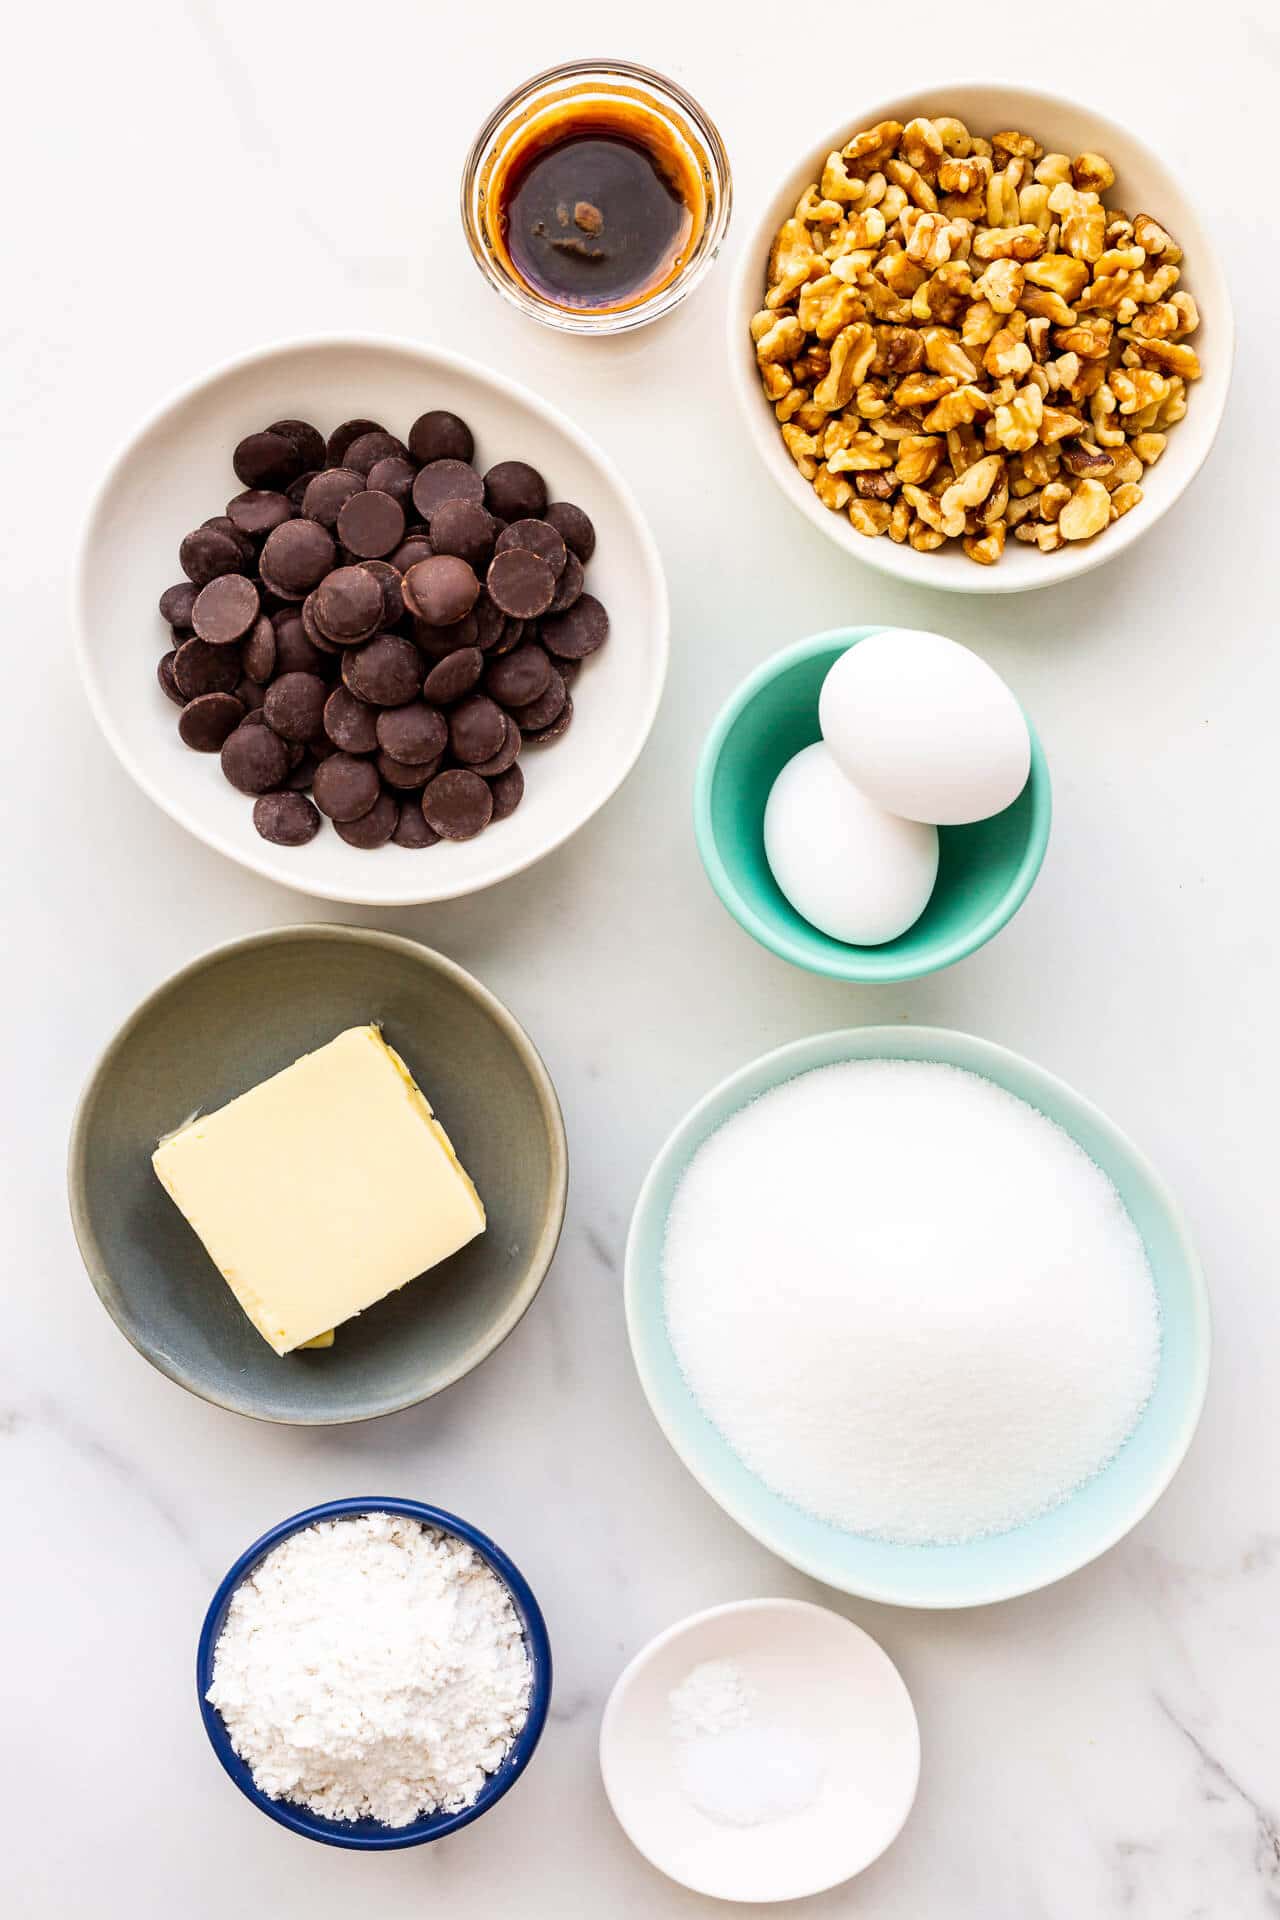 Ingredients needed to make brownies with walnuts, measured out and ready to be mixed.